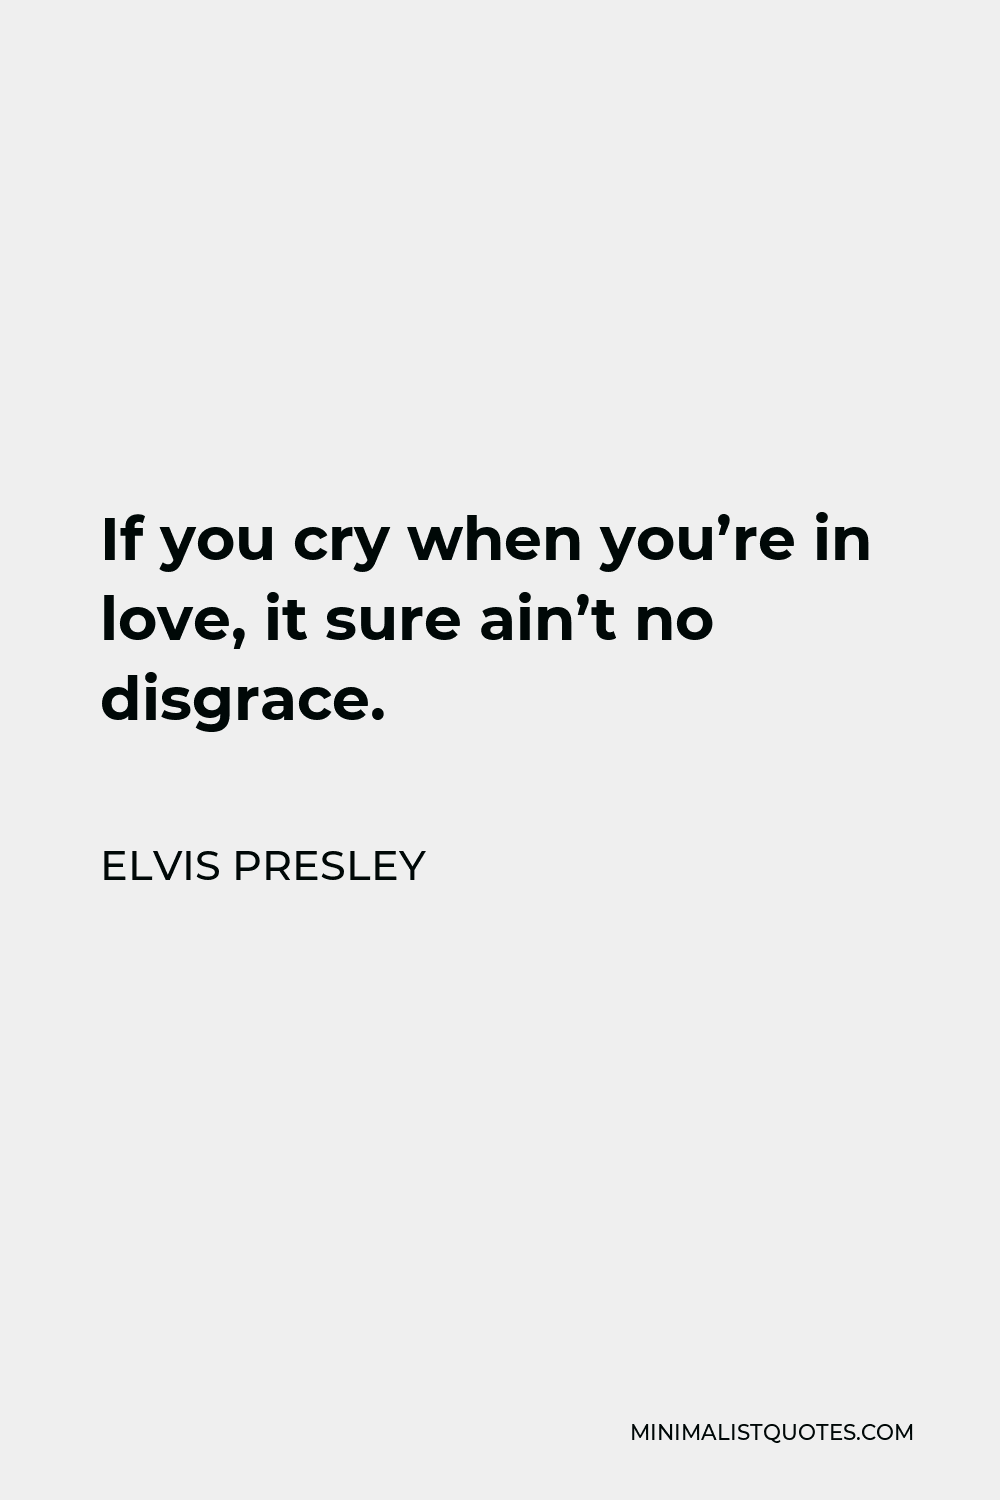 Elvis Presley Quote - If you cry when you’re in love, it sure ain’t no disgrace.